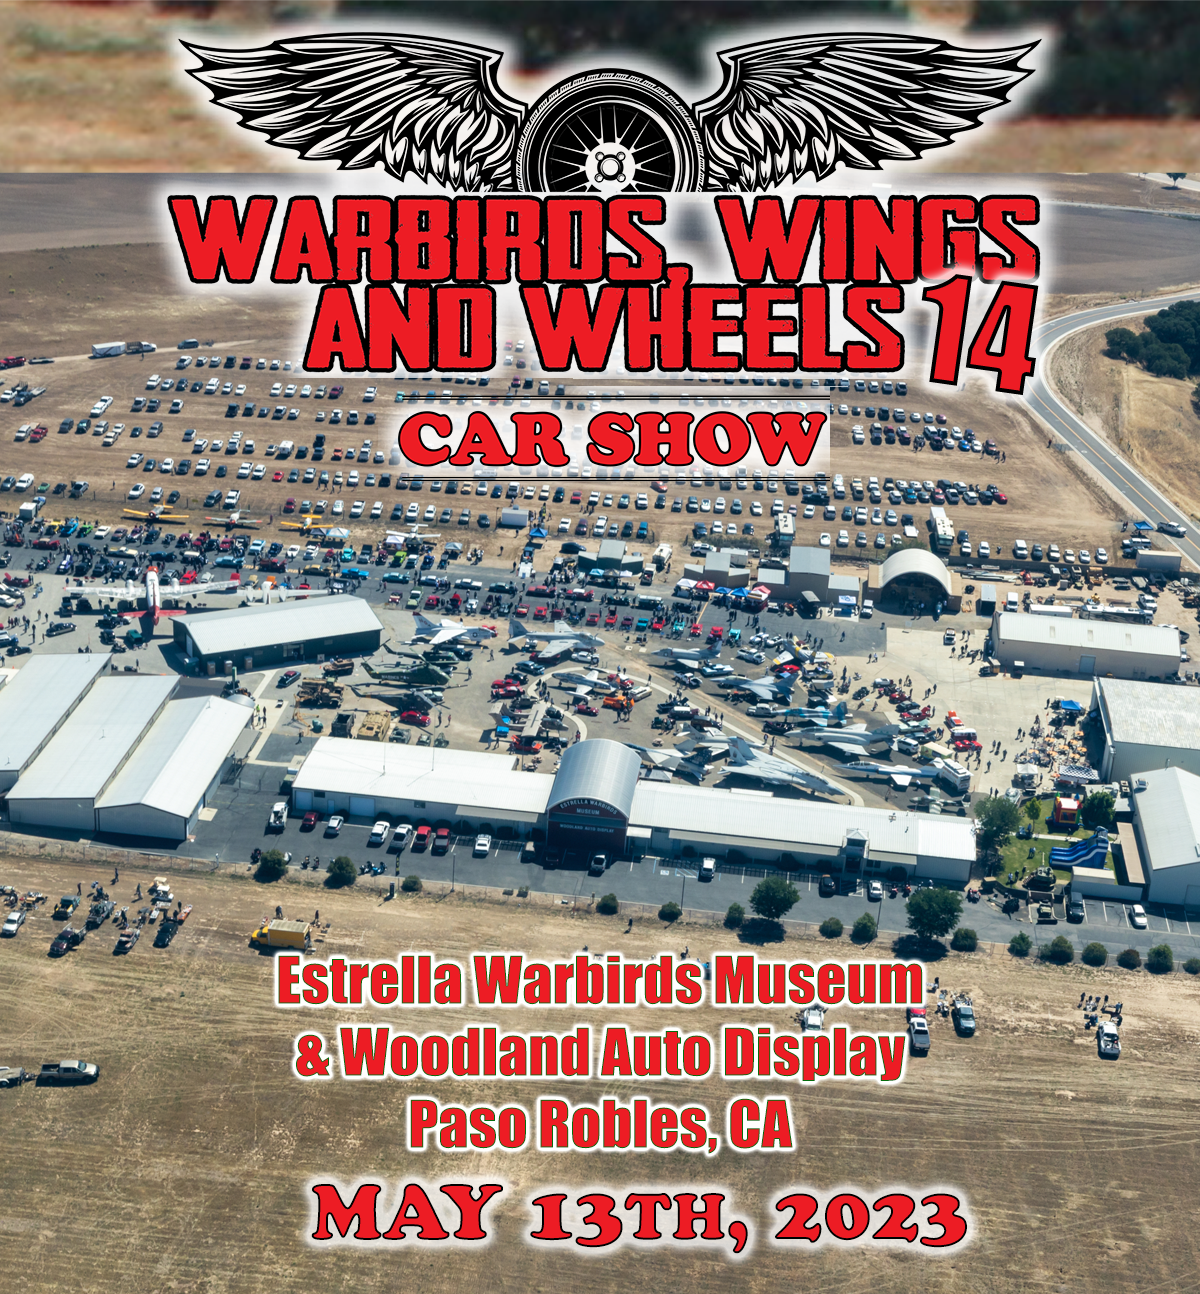 Warbirds Wings & Wheels 14, coming May 13th, 2023